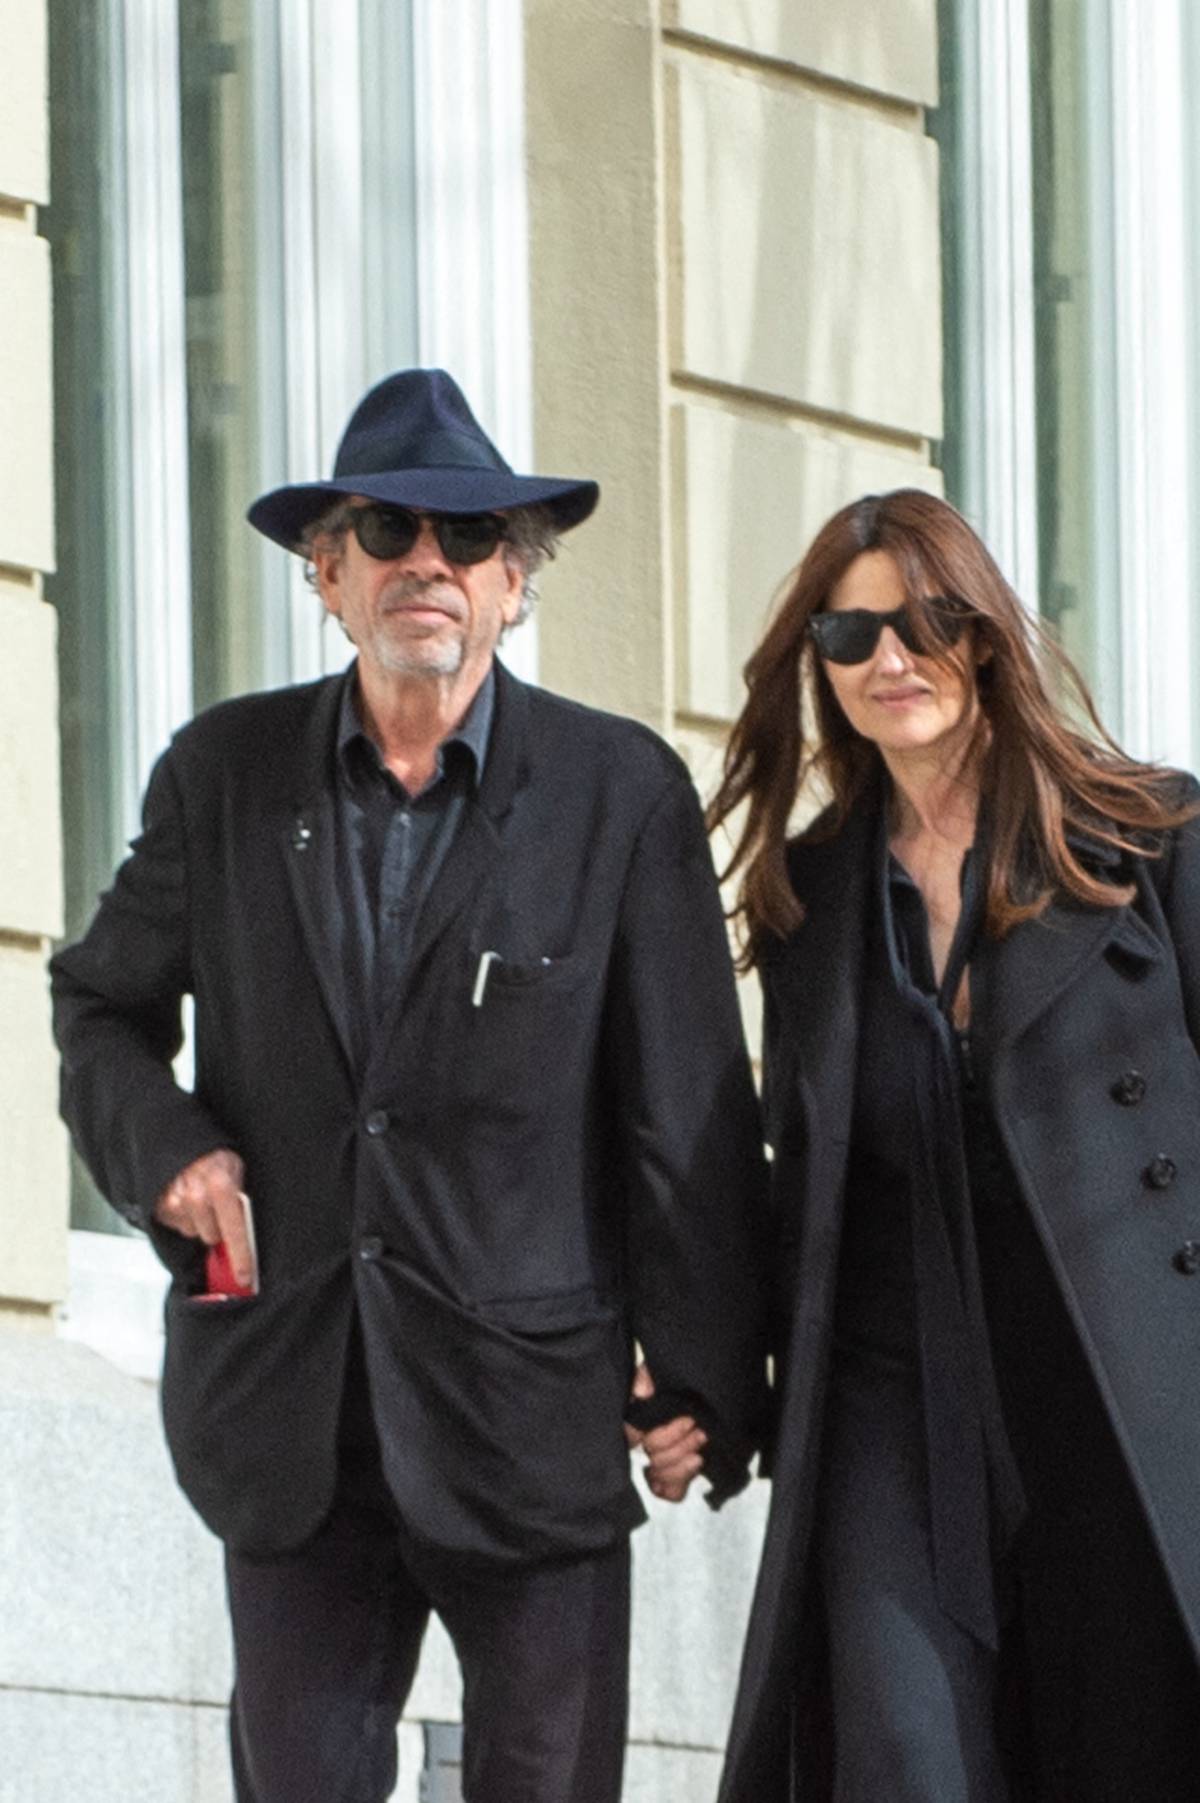 PREMIUM EXCLUSIVE: Tim Burton and Monica Bellucci go public as a couple for the first time on a romantic trip to Madrid